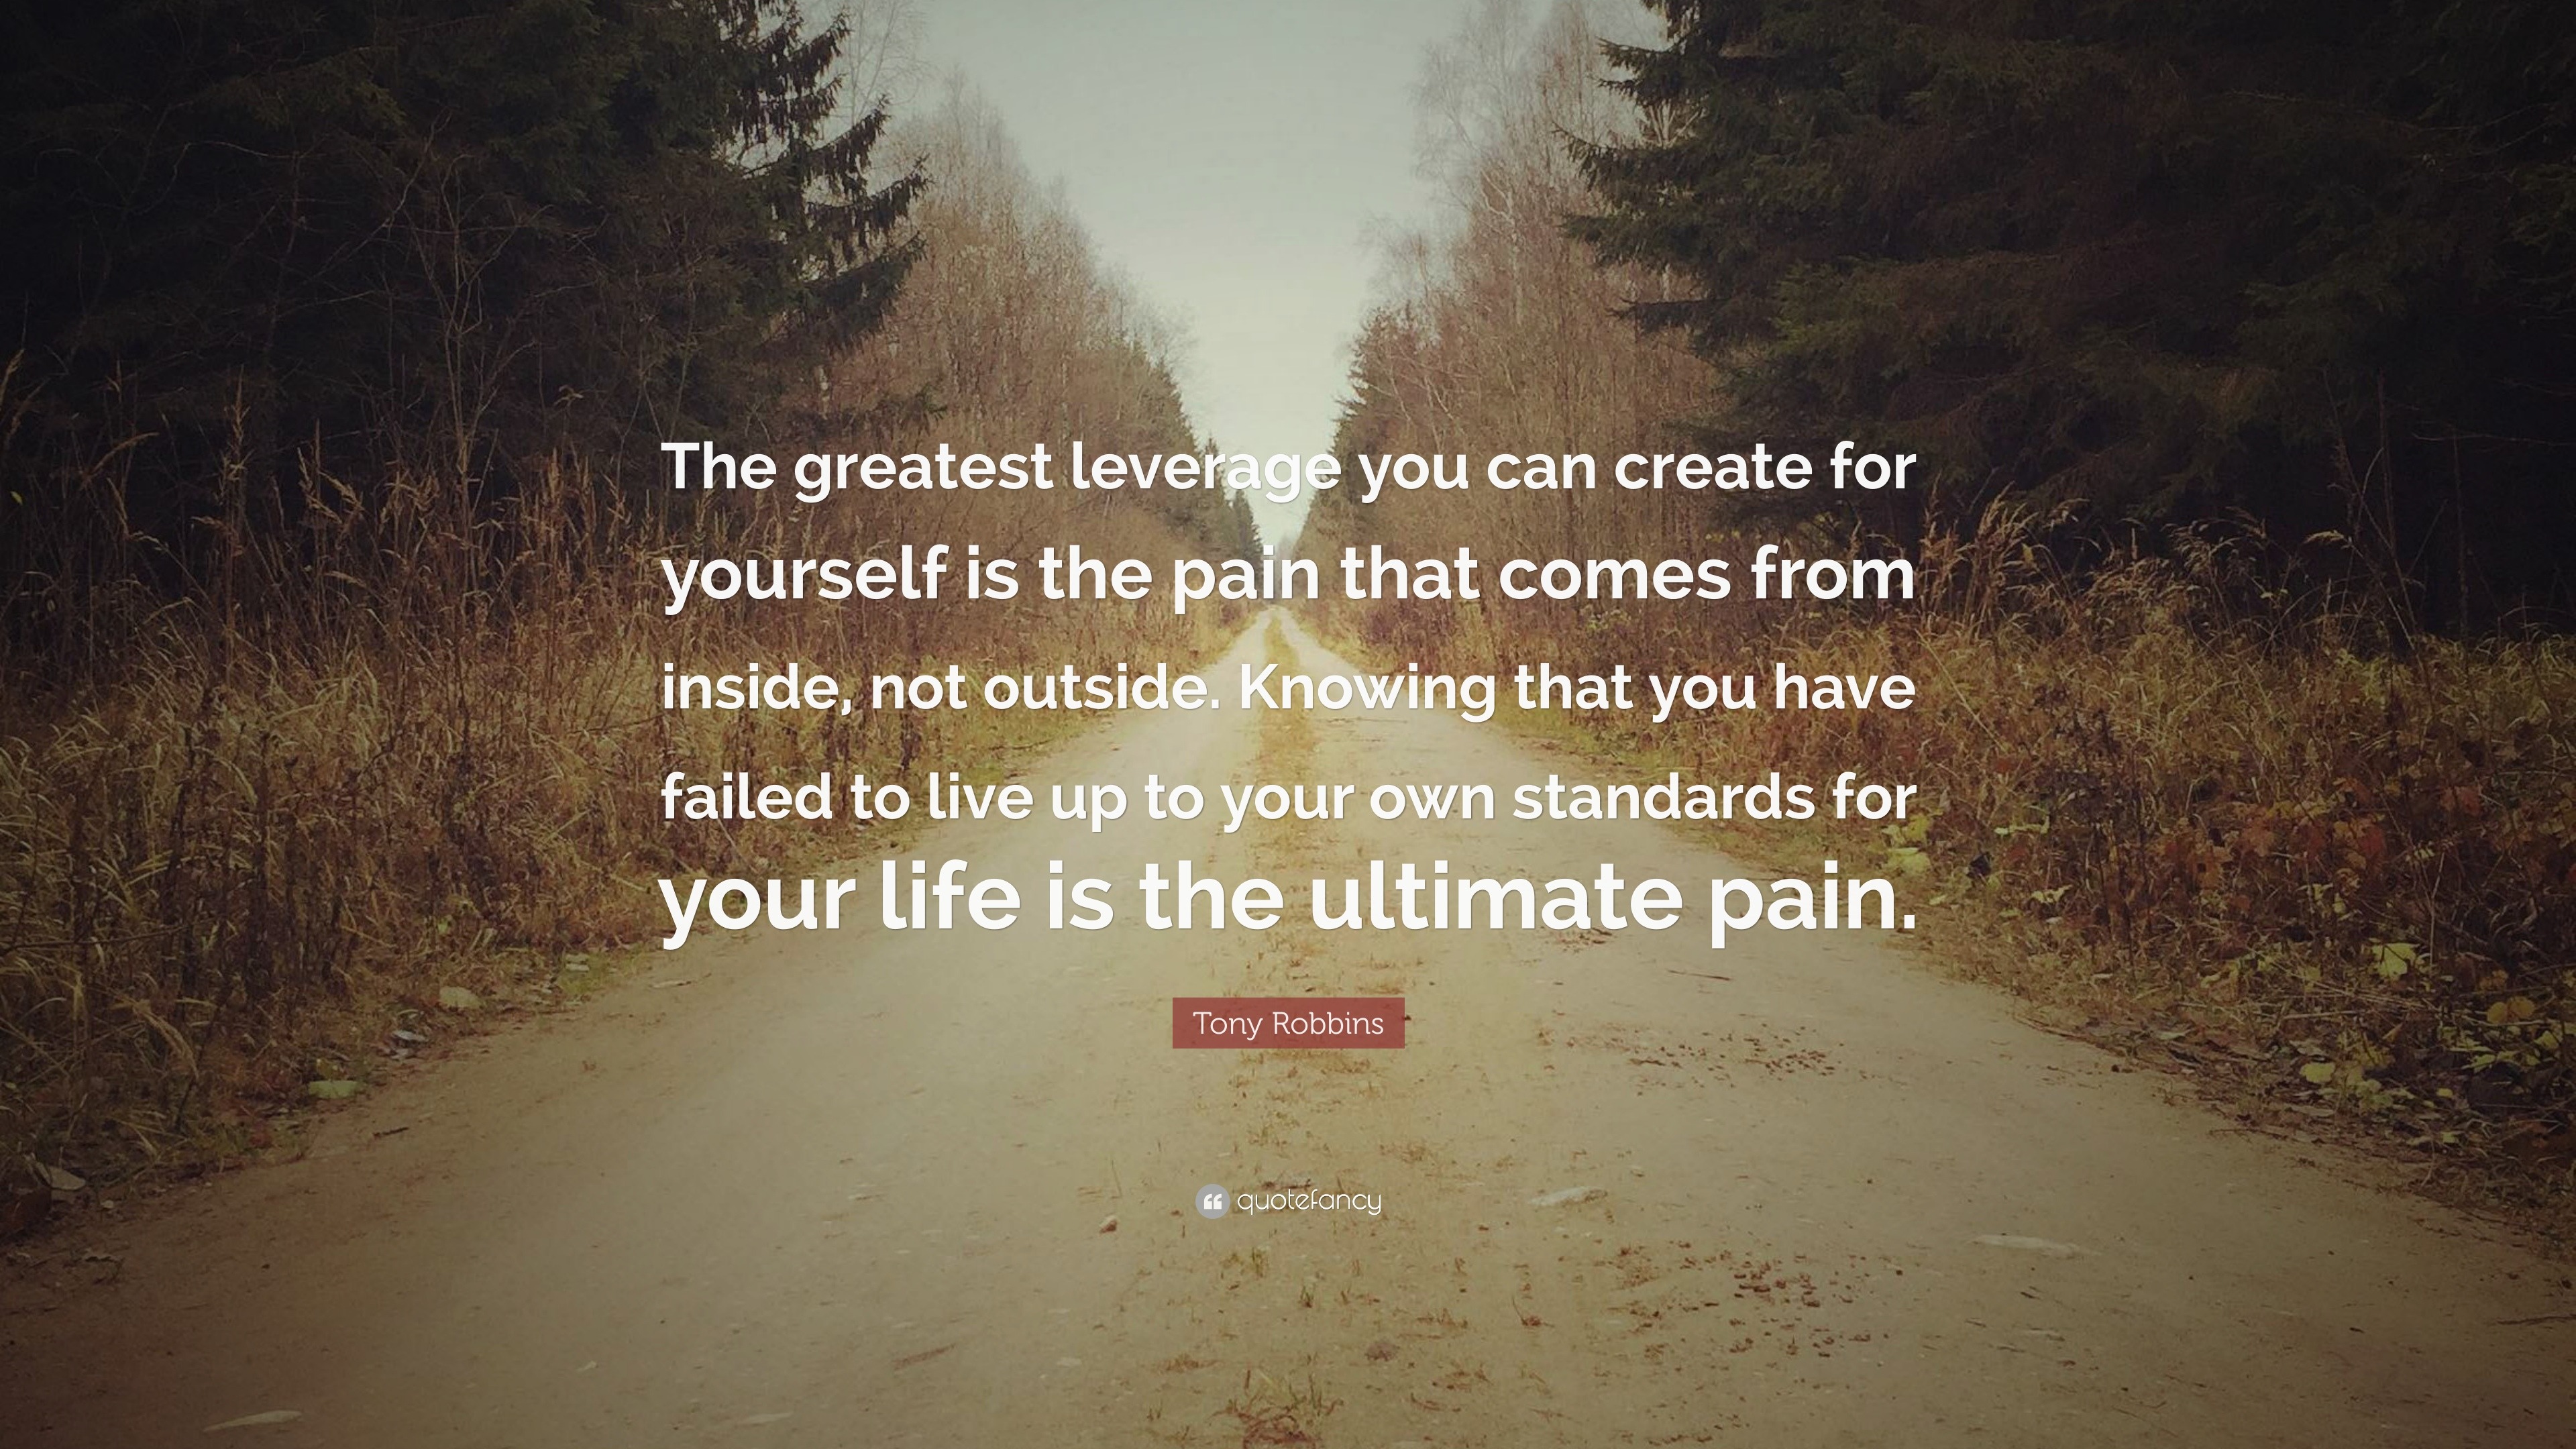 Tony Robbins Quote: “The greatest leverage you can create for yourself ...